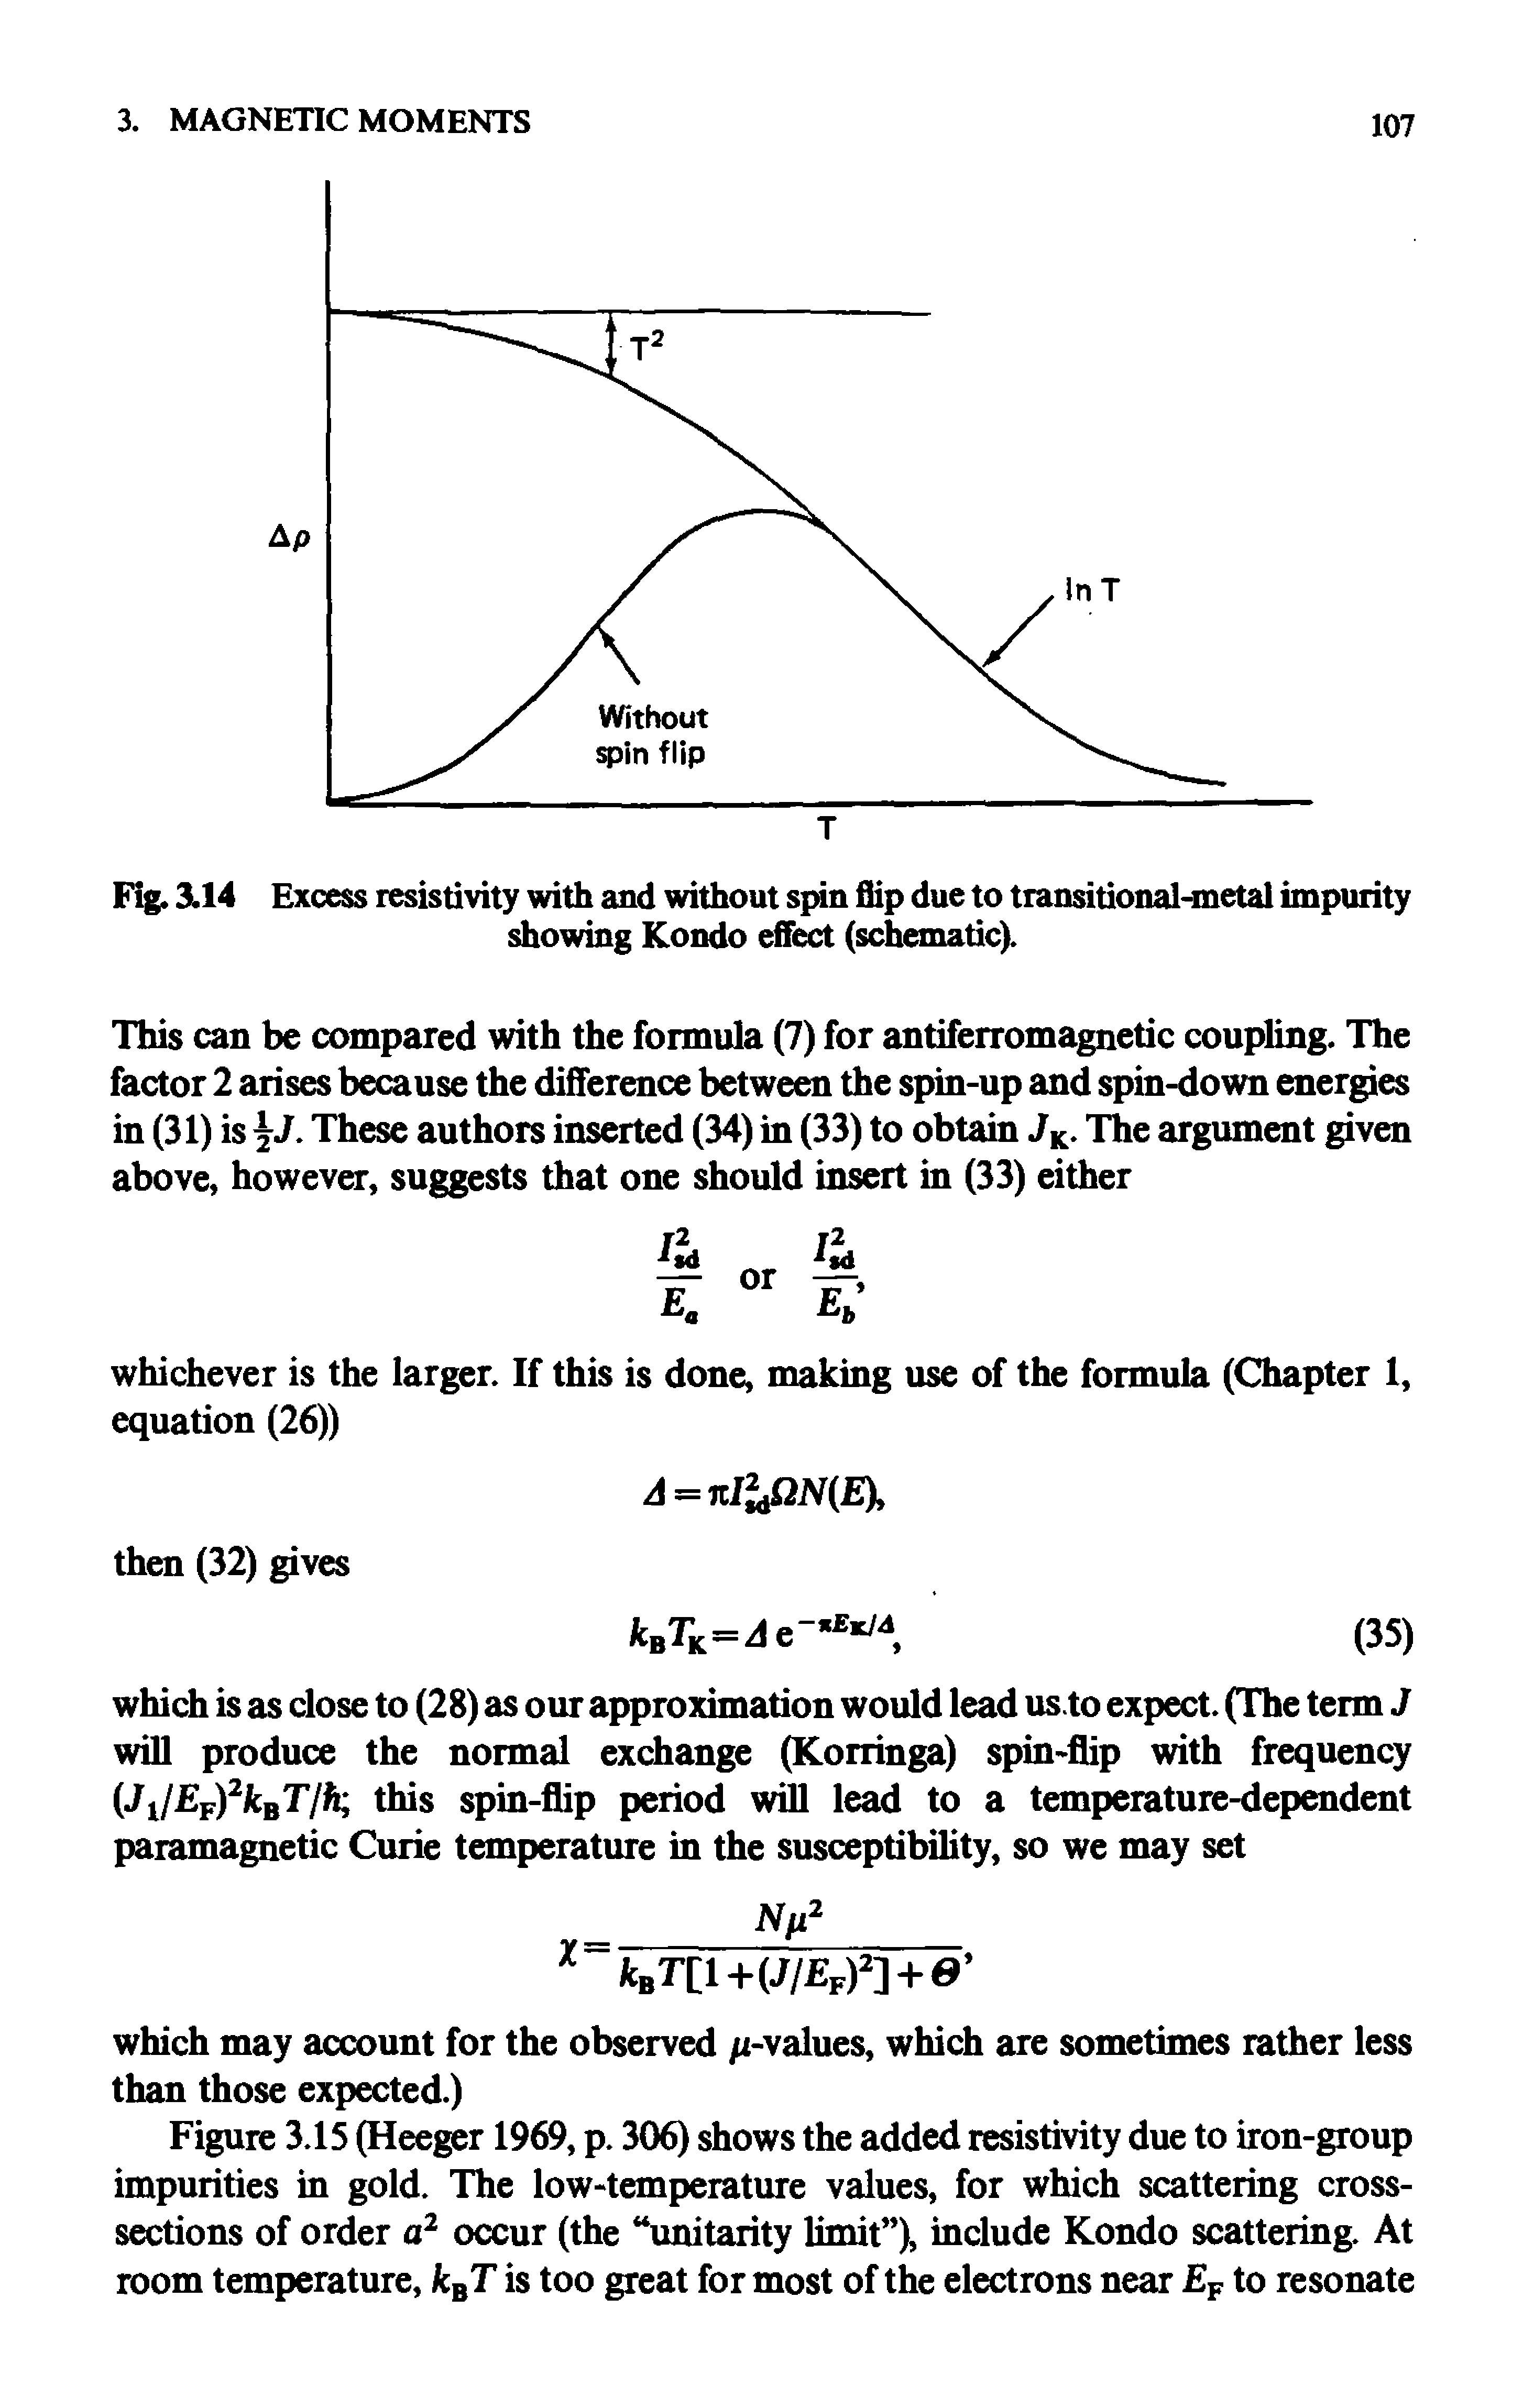 Figure 3.15 (Heeger 1969, p. 306) shows the added resistivity due to iron-group impurities in gold. The low-temperature values, for which scattering cross-sections of order a2 occur (the unitarity limit ), include Kondo scattering. At room temperature, kBT is too great for most of the electrons near E to resonate...